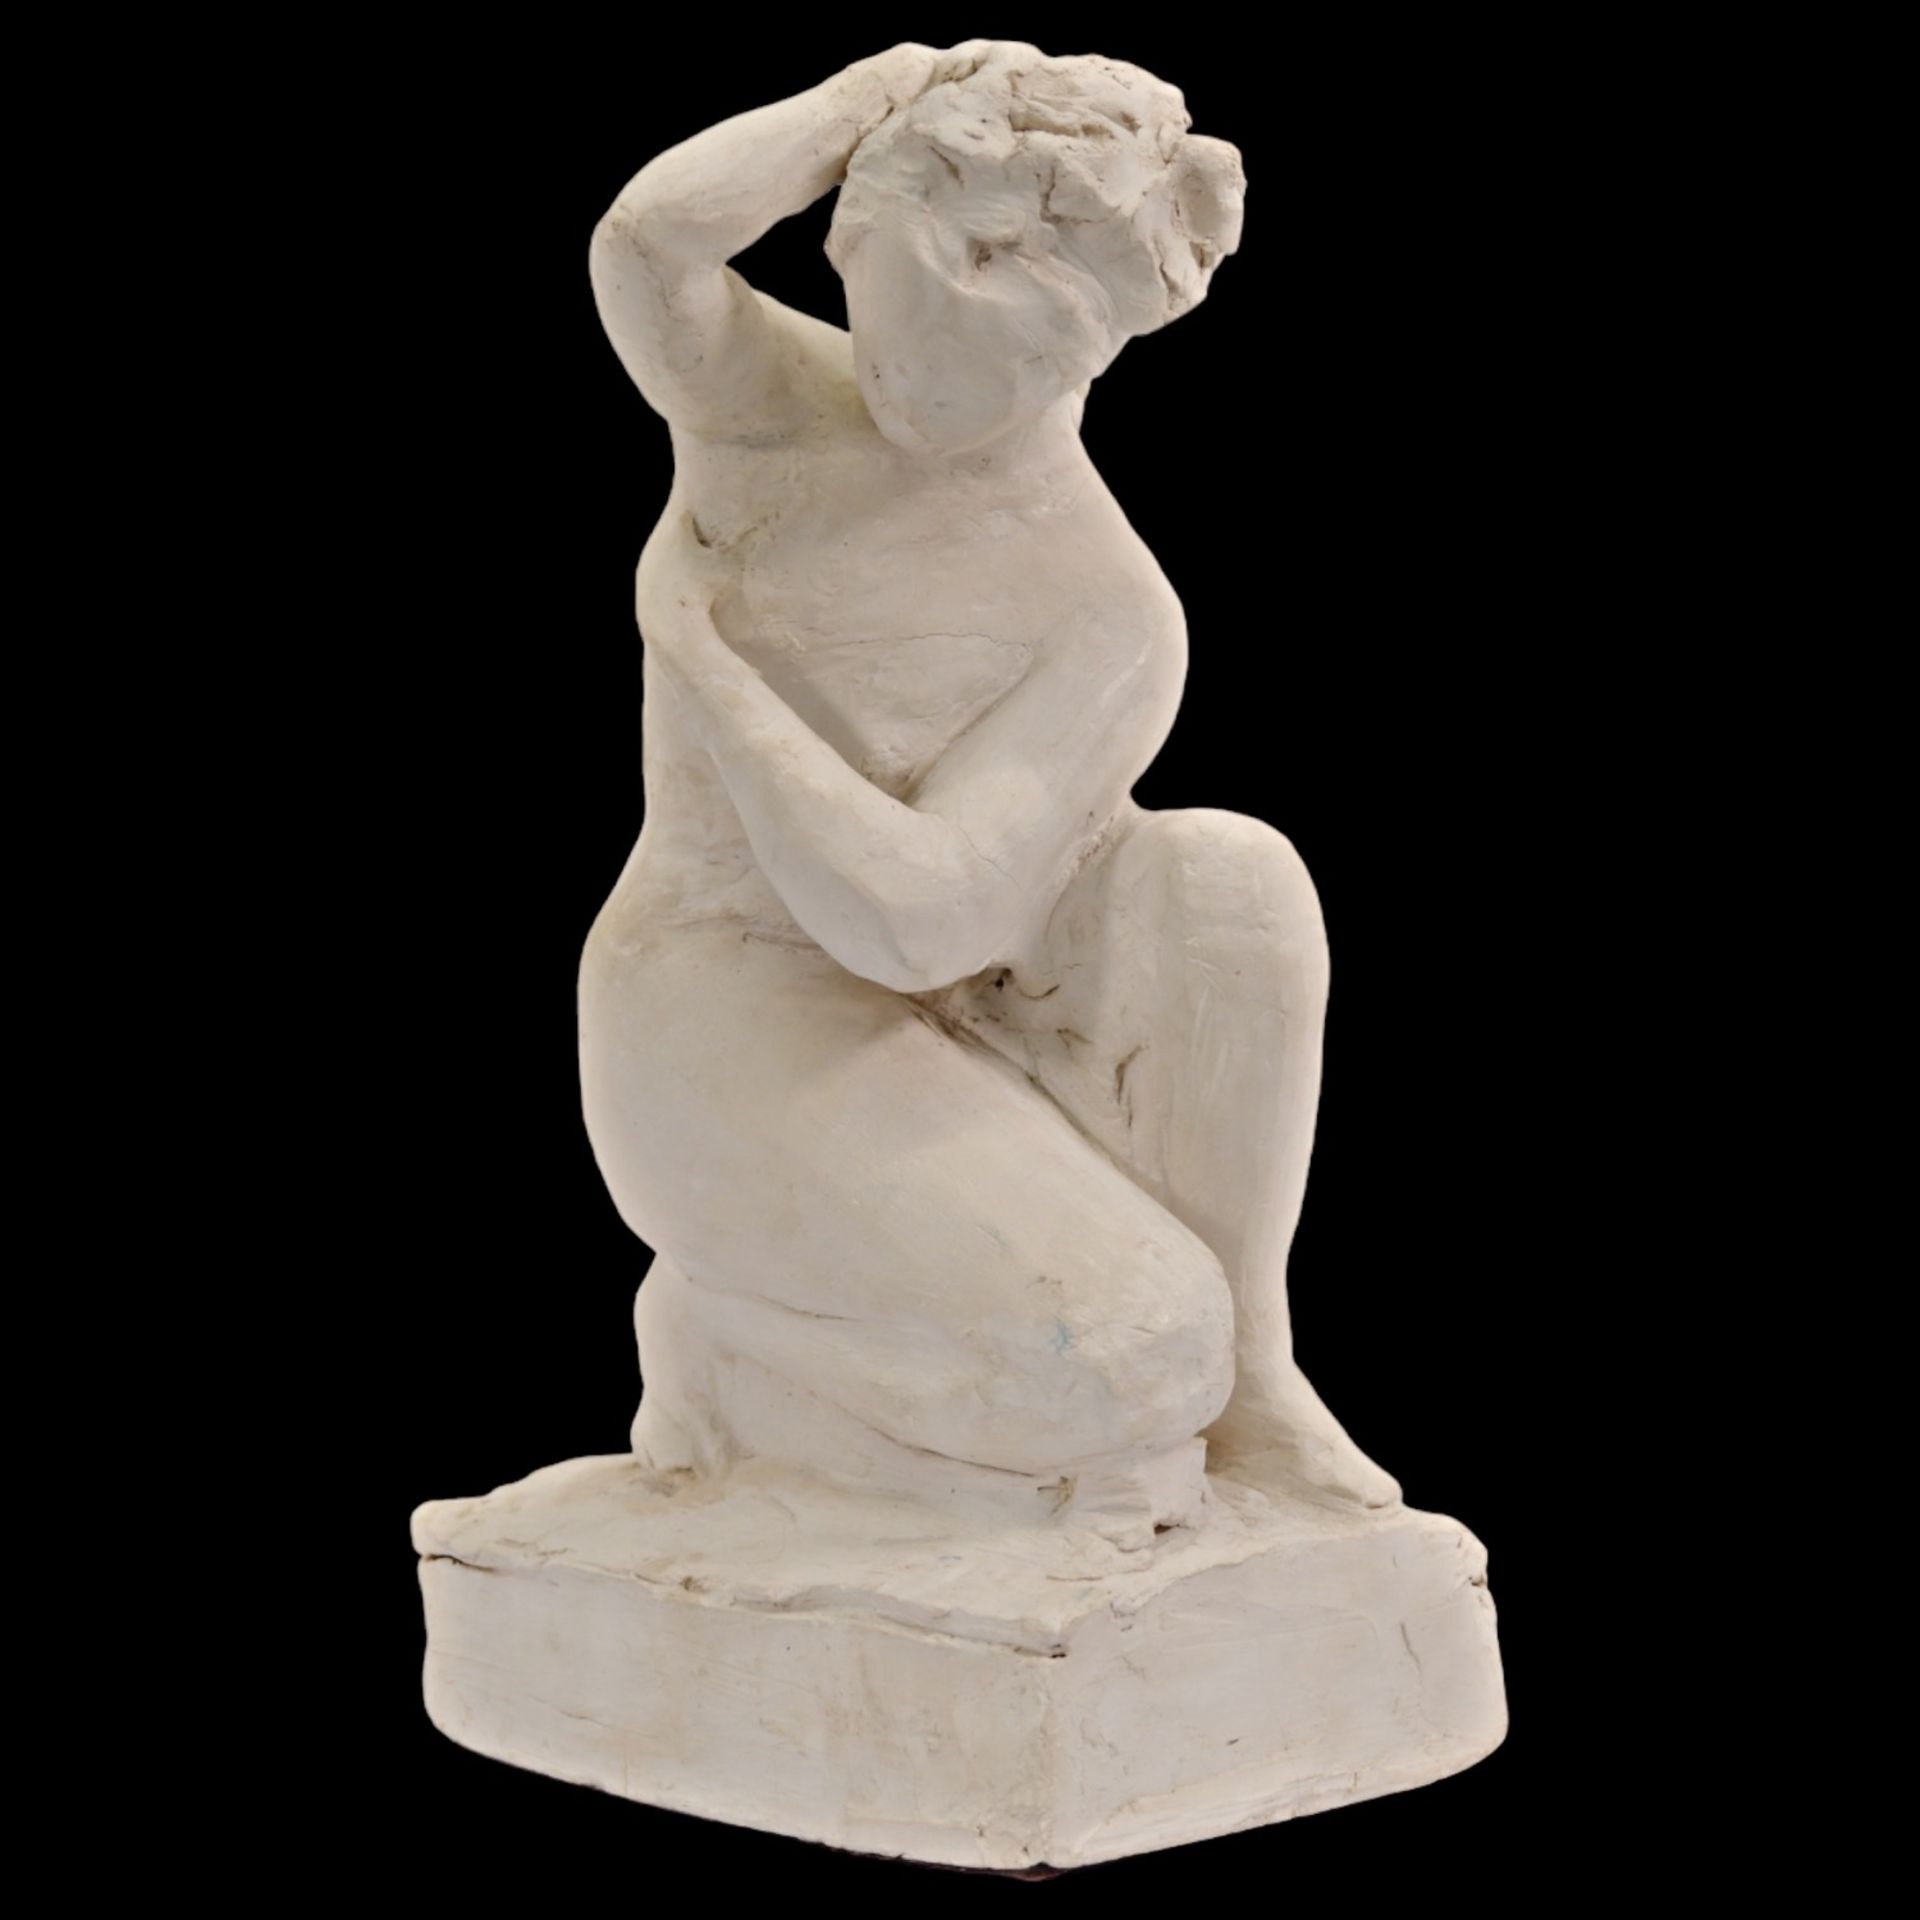 Terracotta sculpture "Young Woman", unsigned, France, 19th century. Collectibles and home decor. - Image 2 of 8